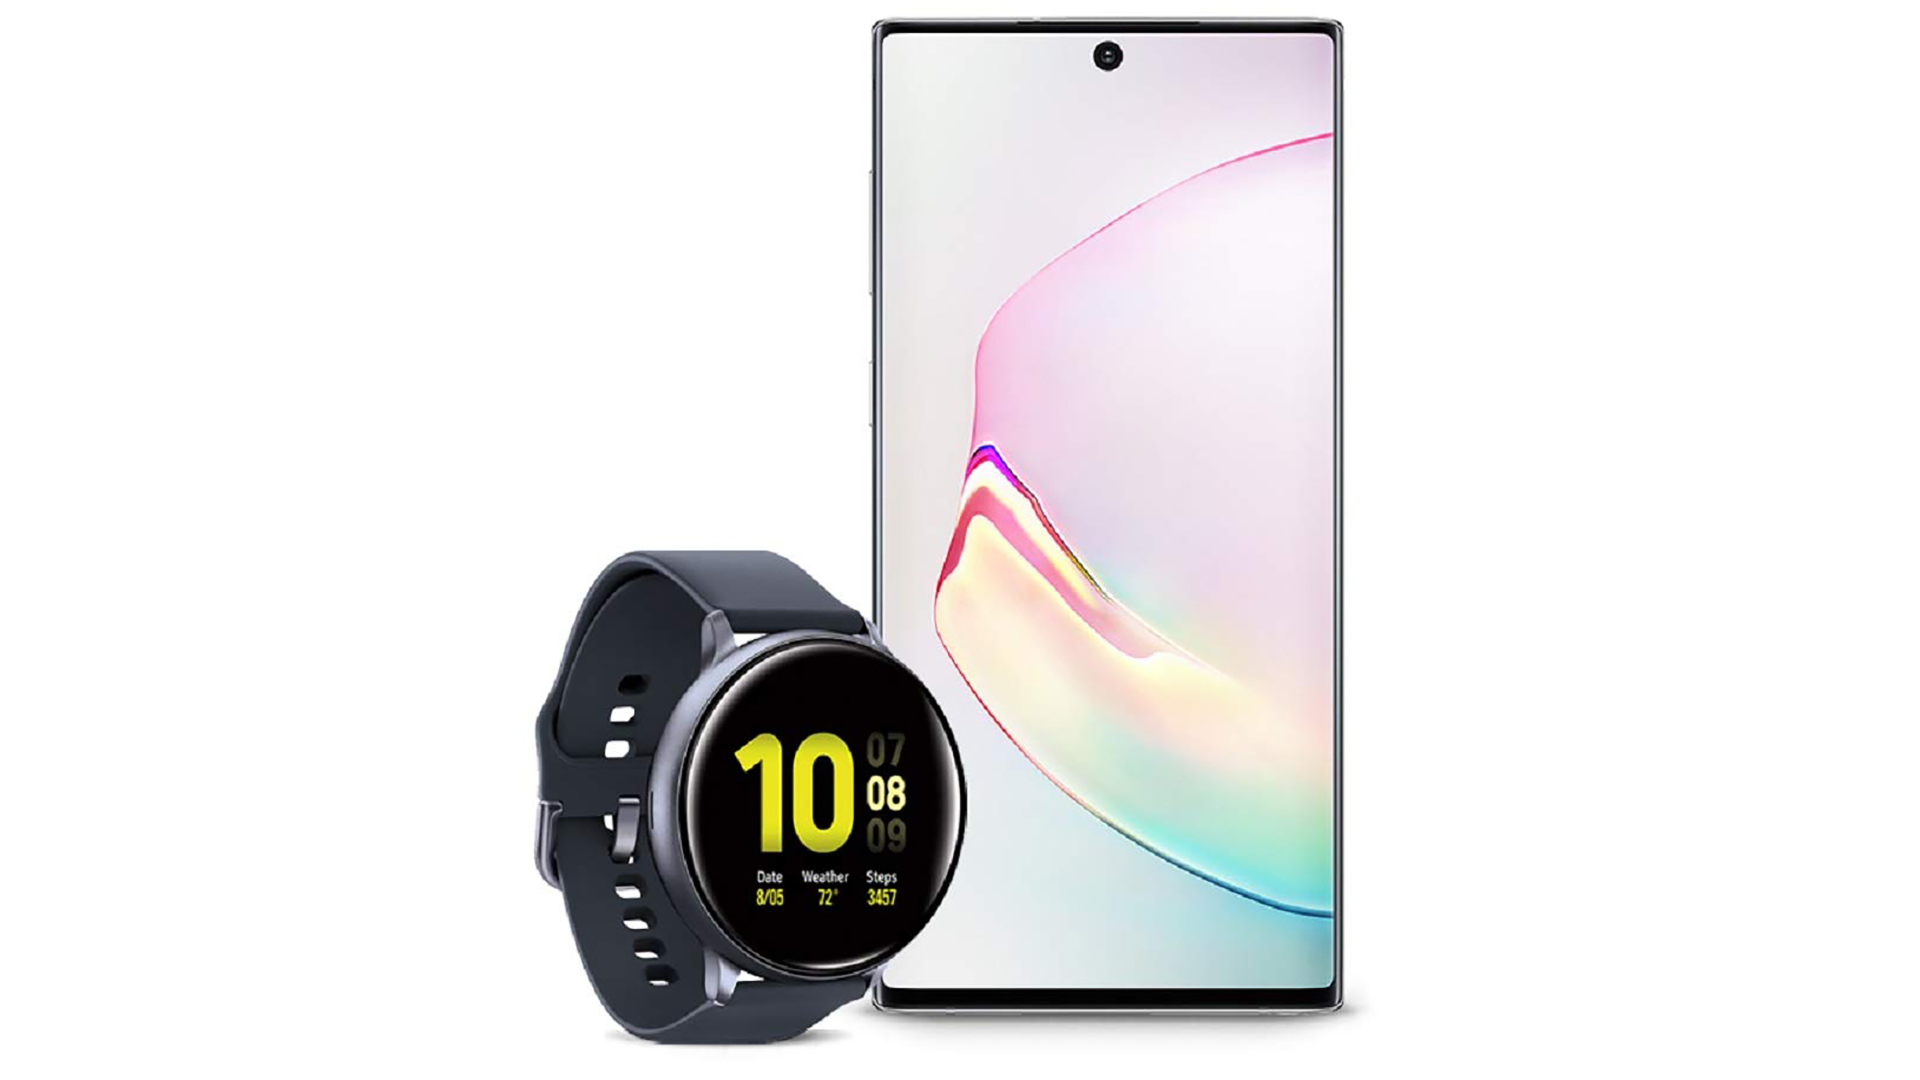 Galaxy Note 10 and Galaxy Watch Active 2